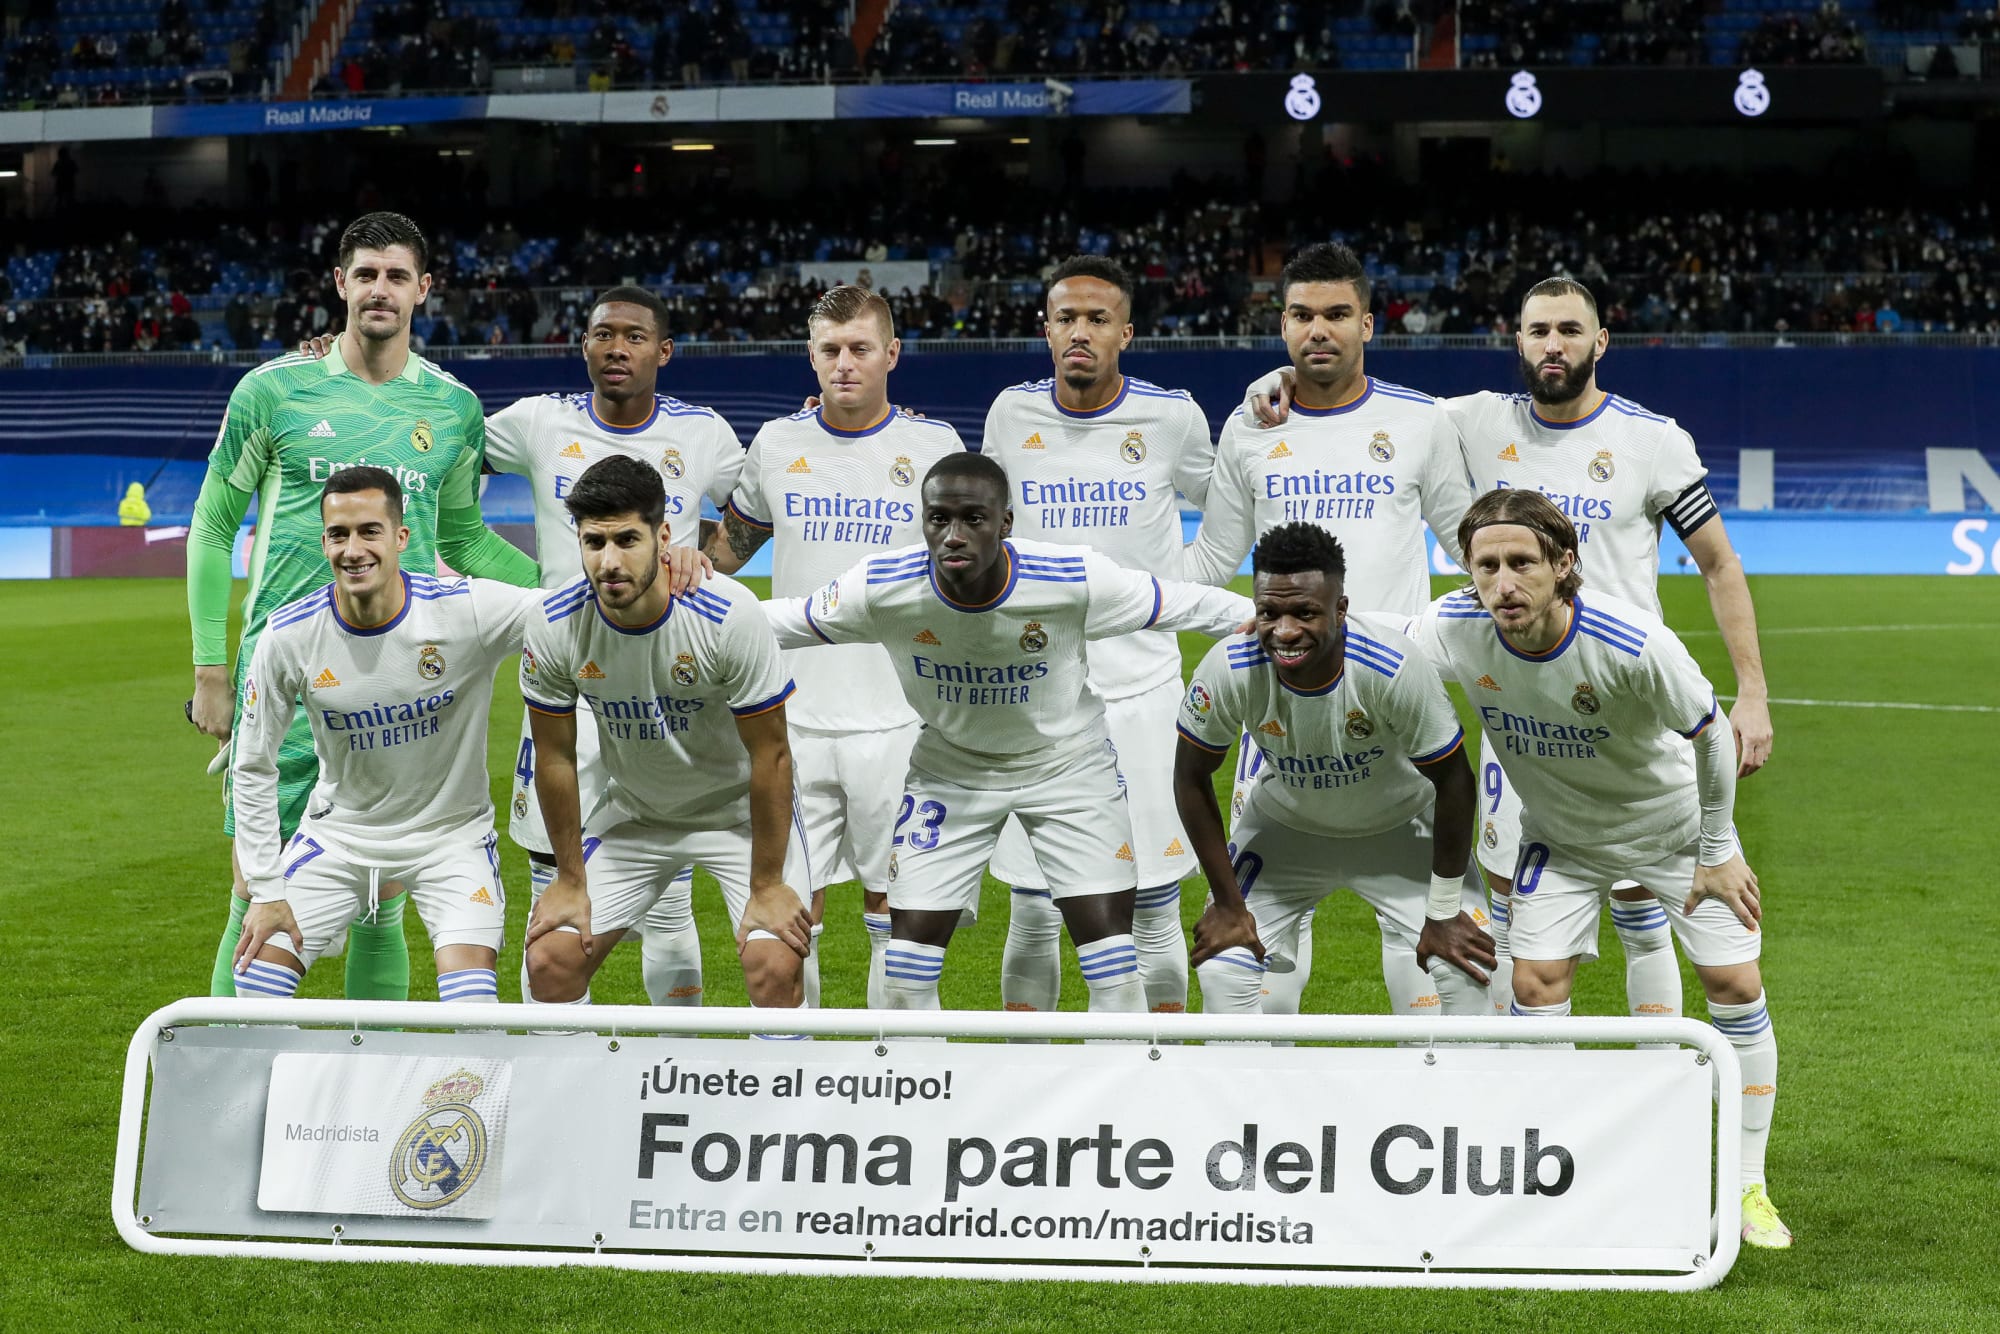  Real Madrid players pose for a team photo before their match against Manchester City, with some players expressing concern about facing the English club.